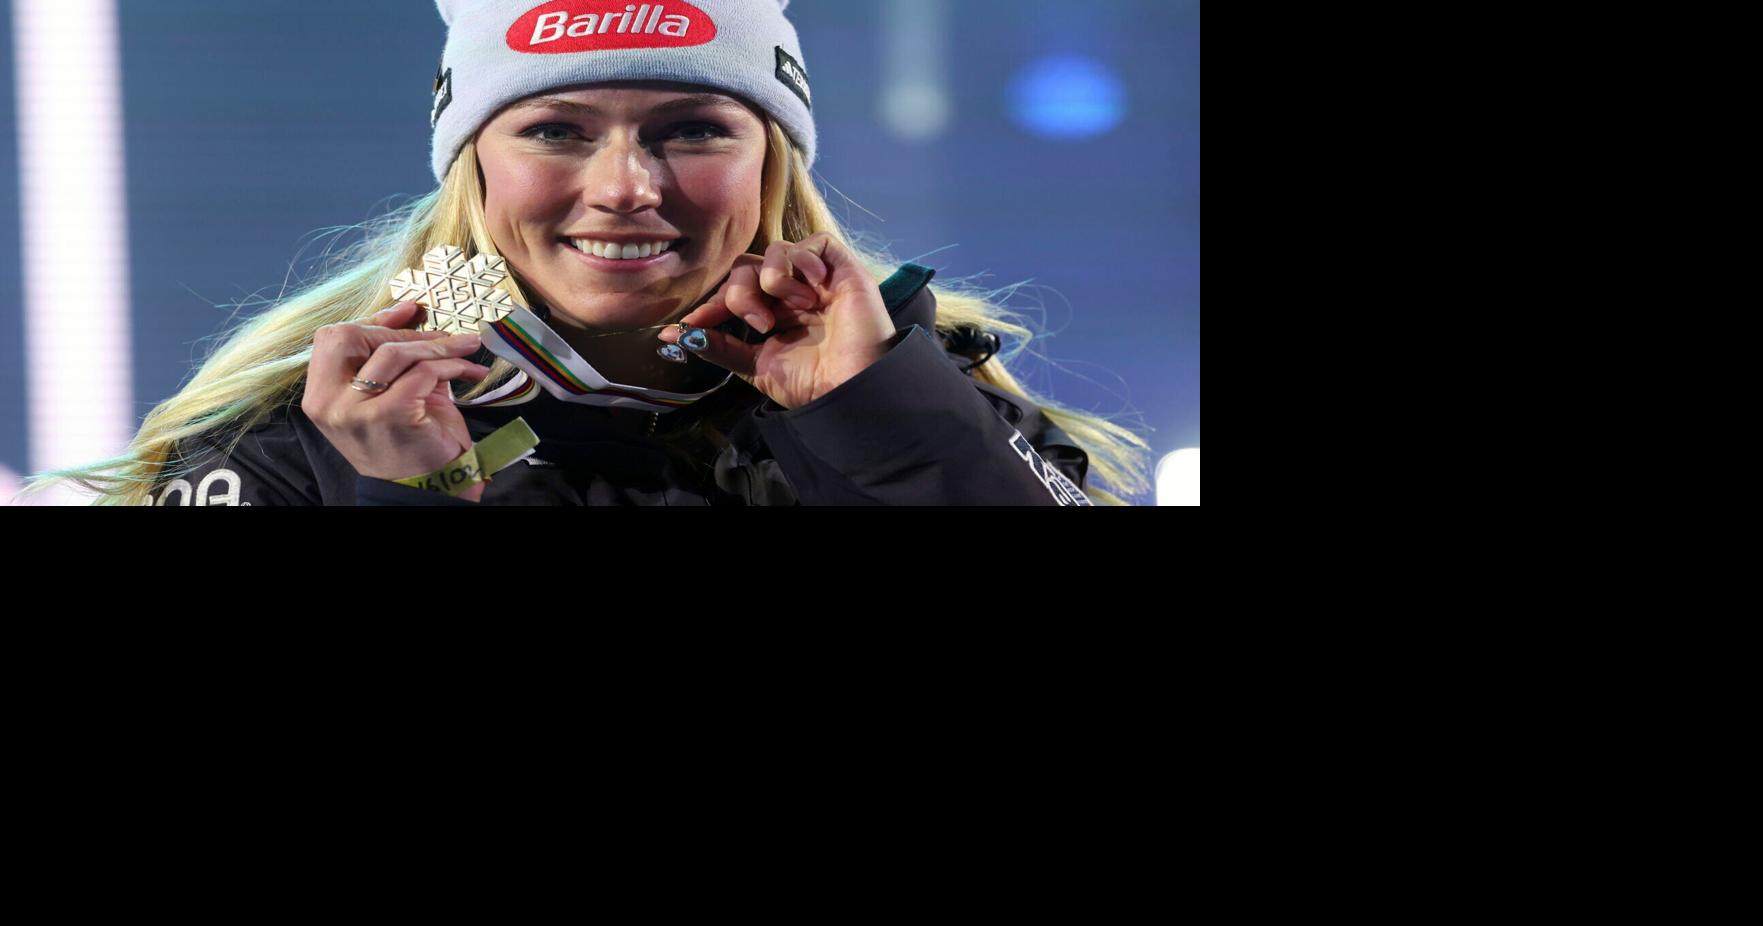 Shiffrin remembers her late father at gold-medal ceremony